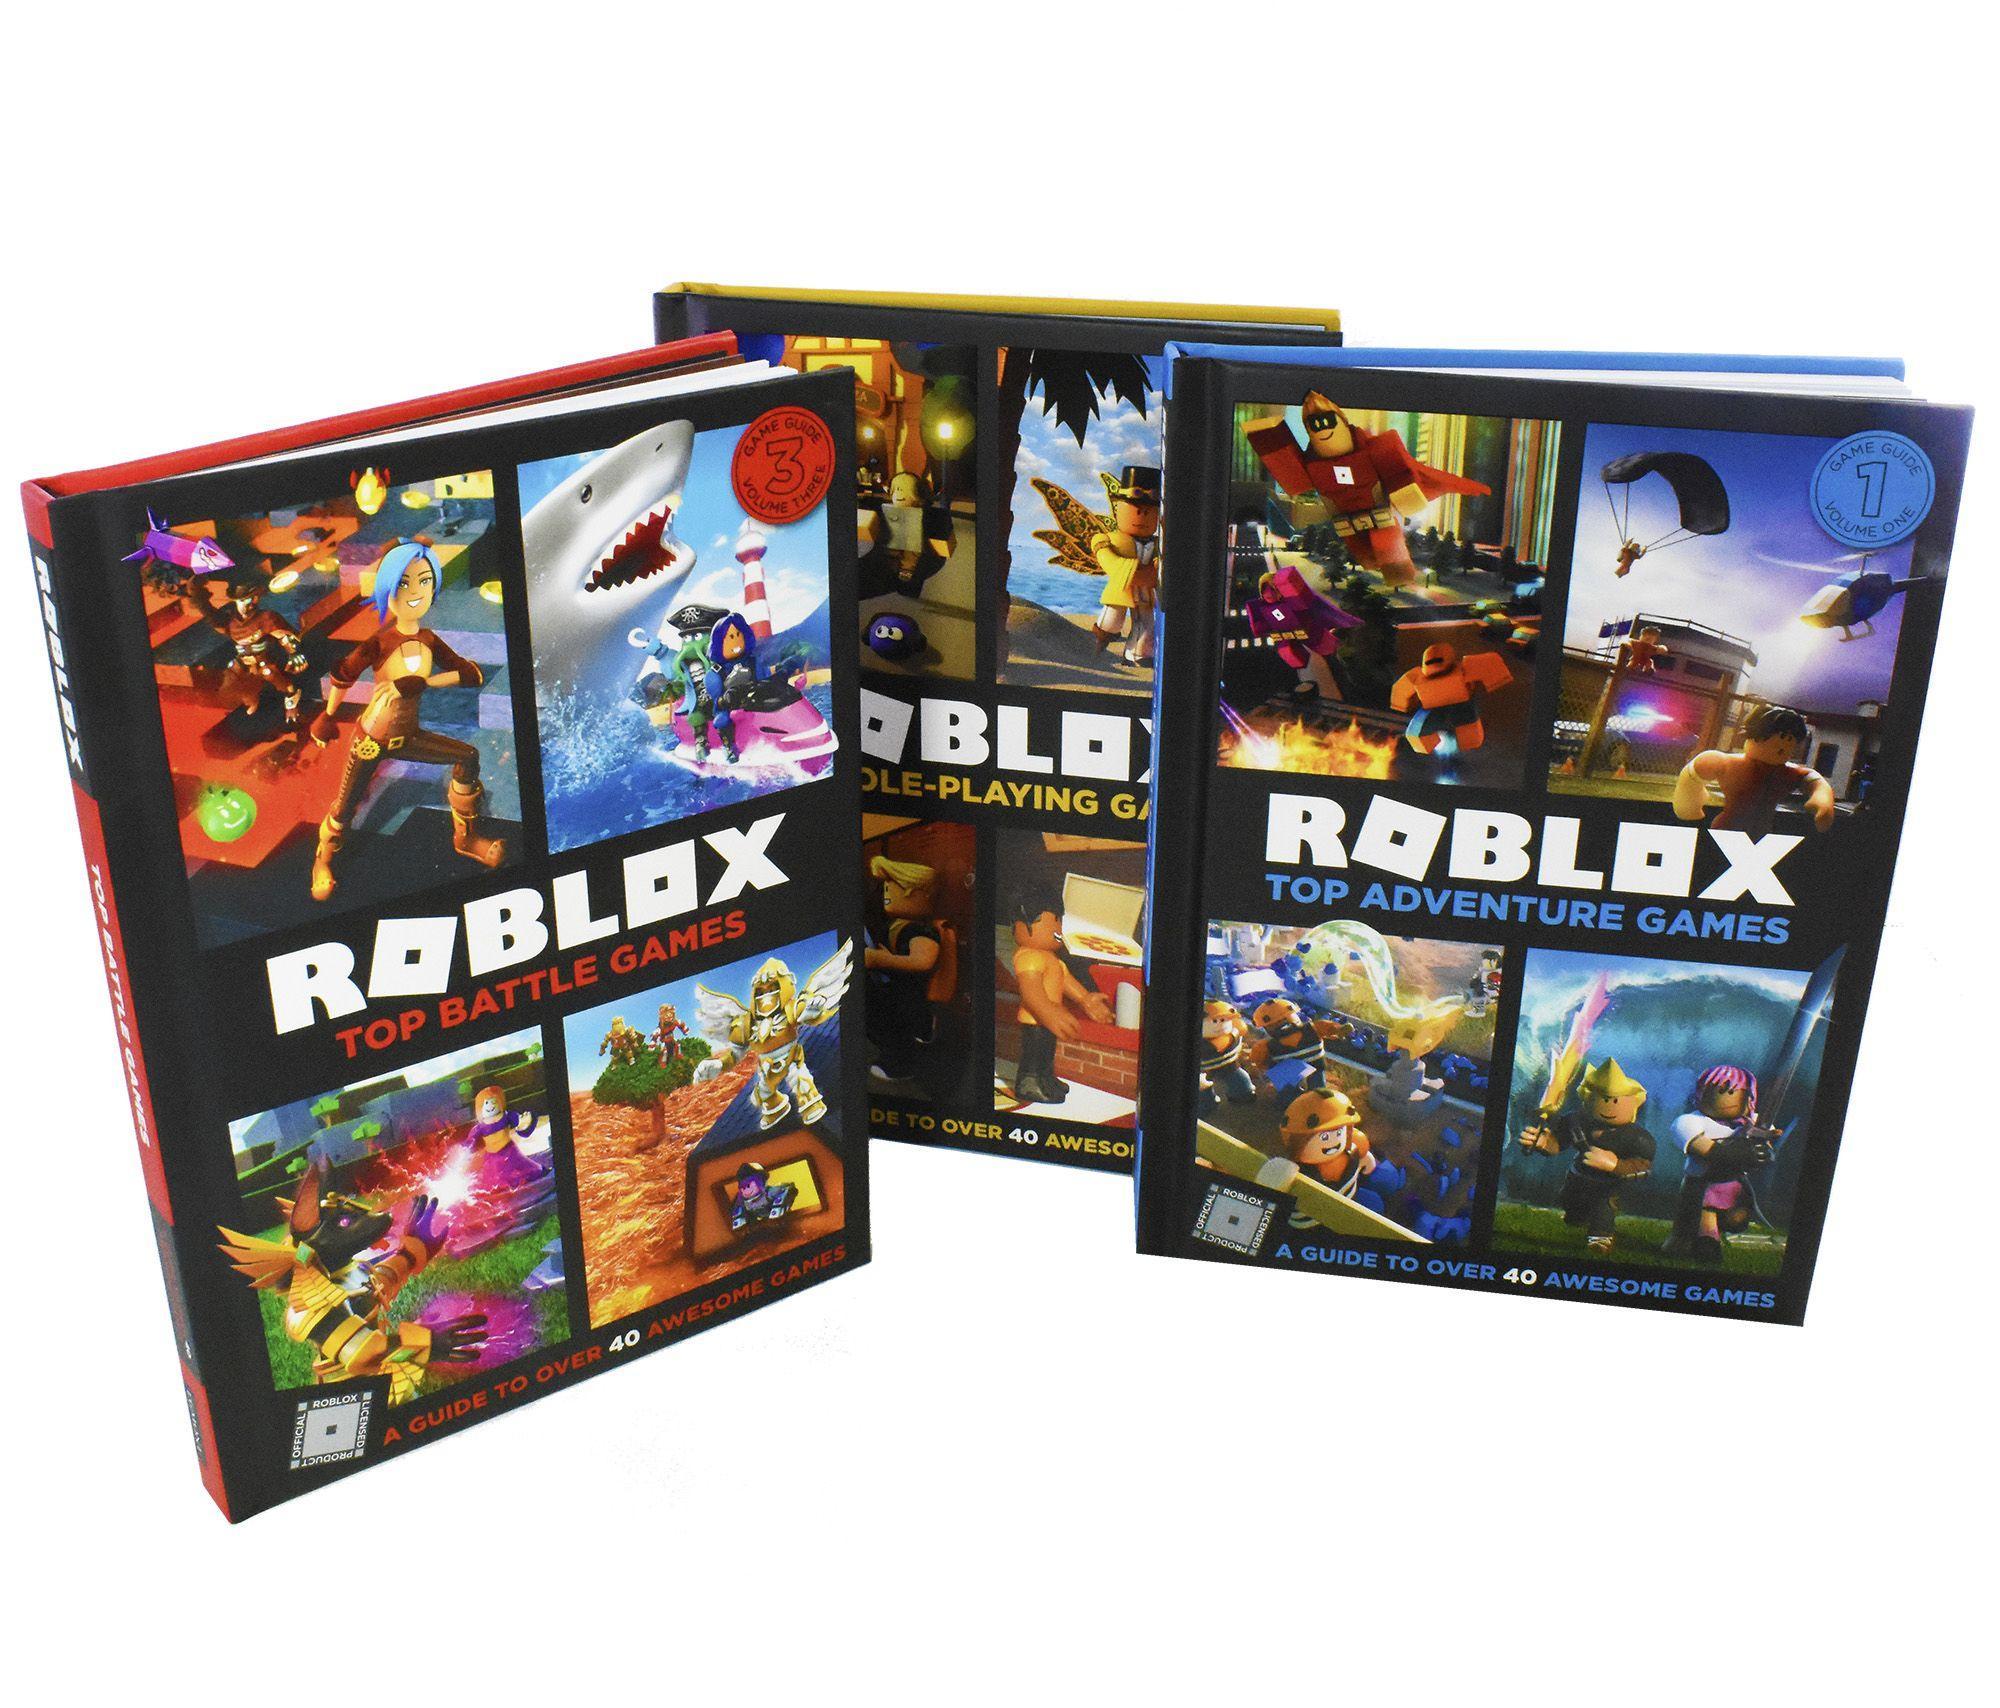 Roblox Ultimate Guide 3 Books Children Collection Gaming Paperback Books2door - roblox ultimate guide collection amazon co uk egmont publishing